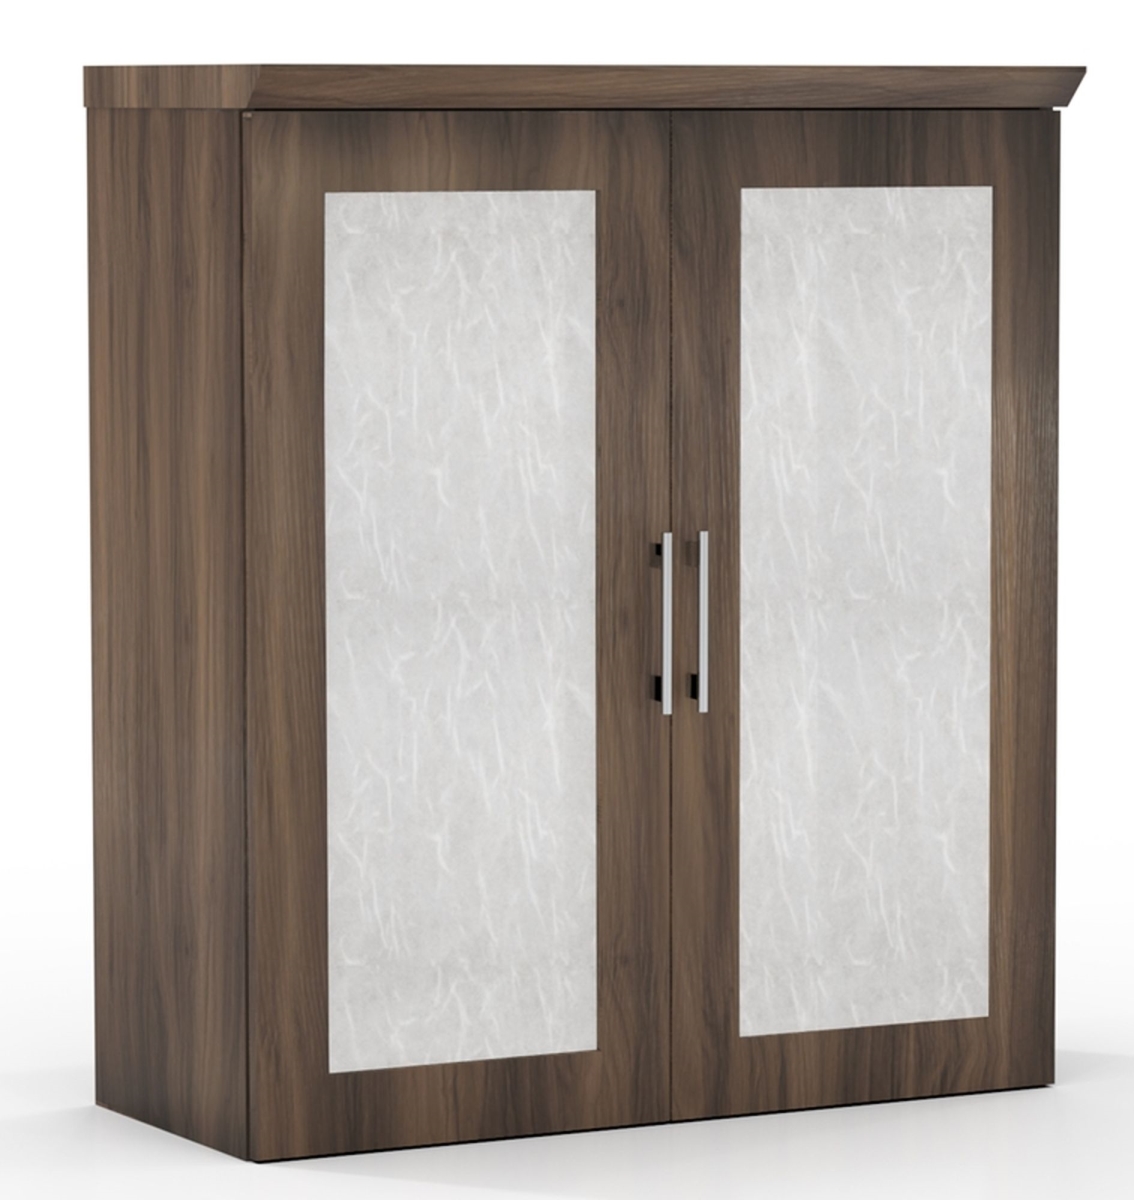 Stscadtbs Sterling Storage Cabinet With Acrylic Doors - Textured Brown Sugar - 41.62 X 36 X 16.5 In.